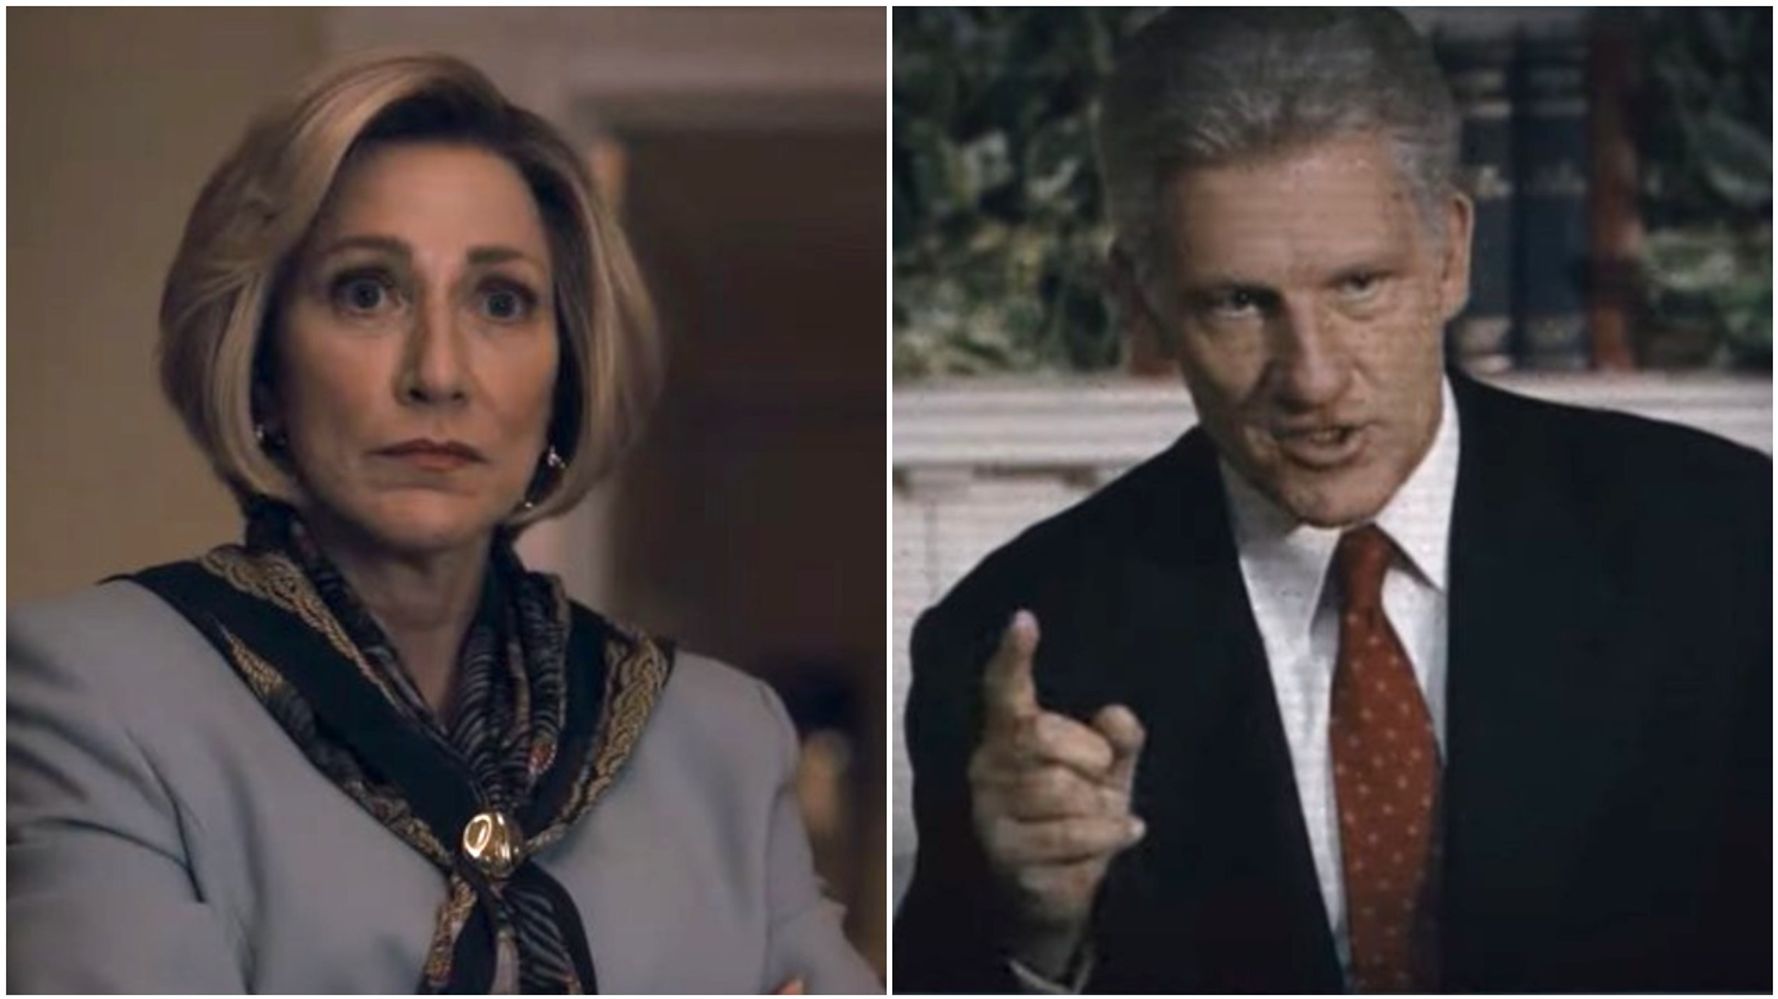 'American Crime Story' Trailer Shows Edie Falco, Clive Owen As The Clintons